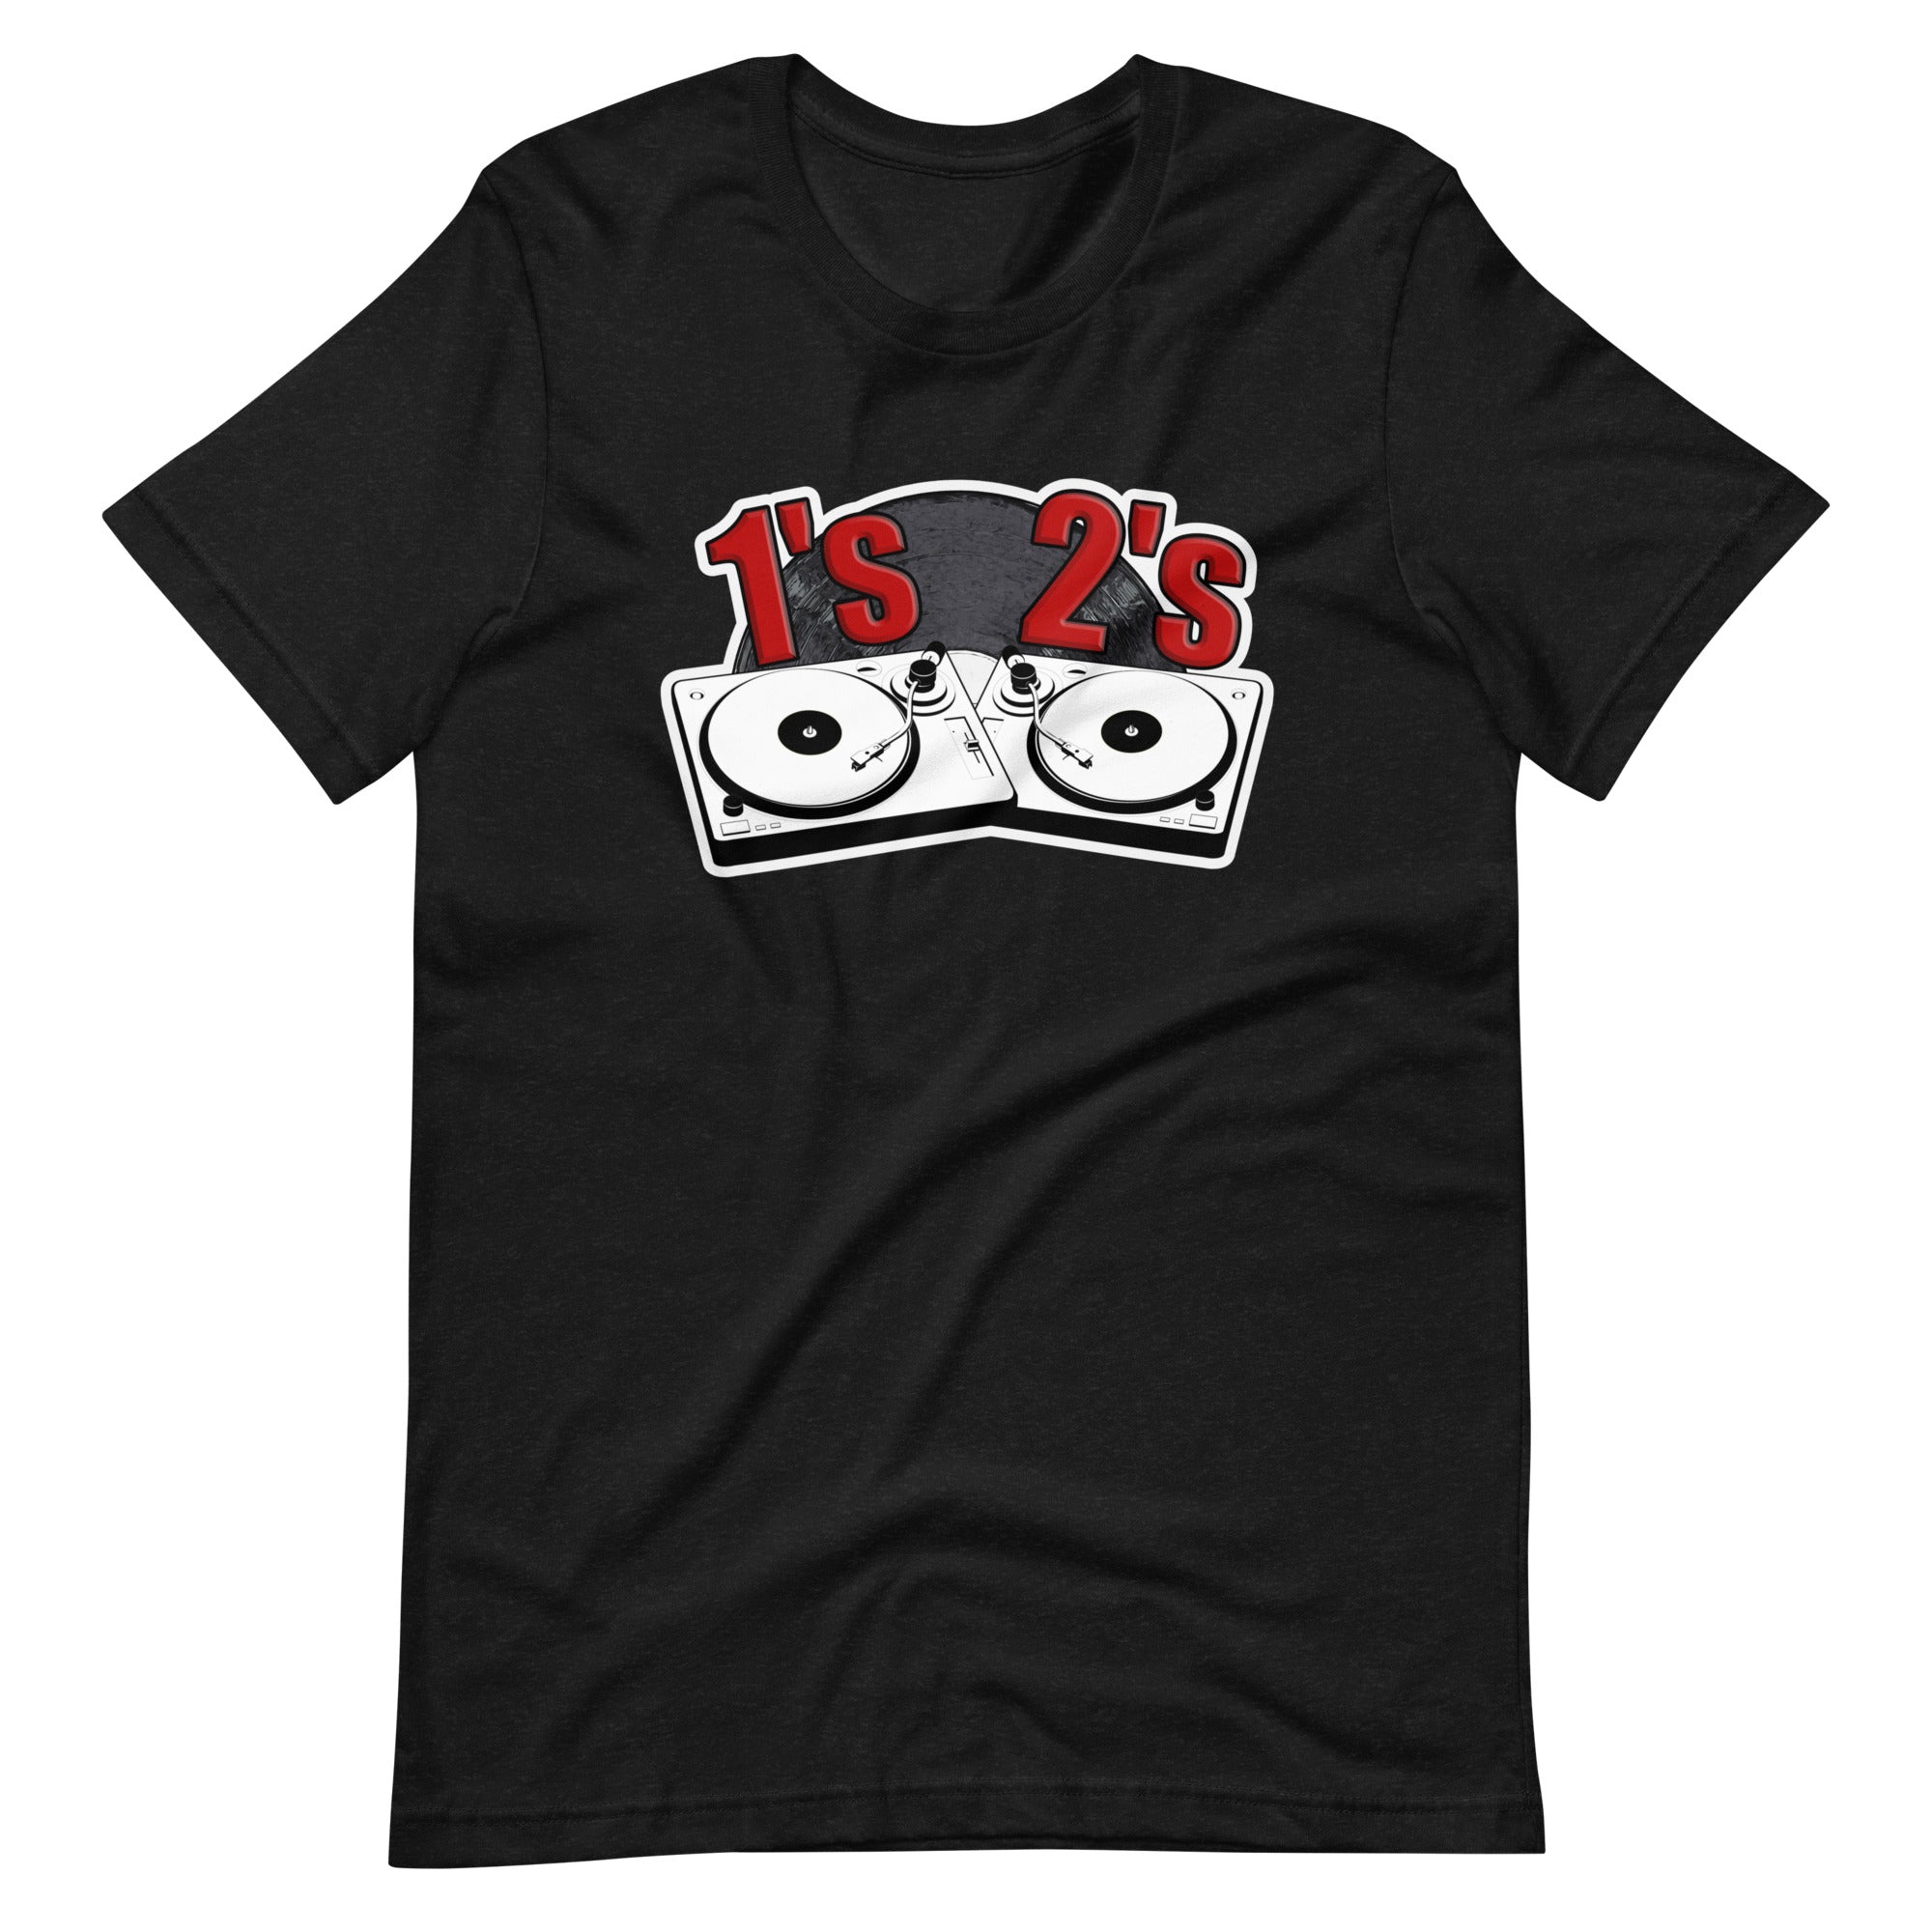 1's and 2's t-shirt – Dynamite Apparel